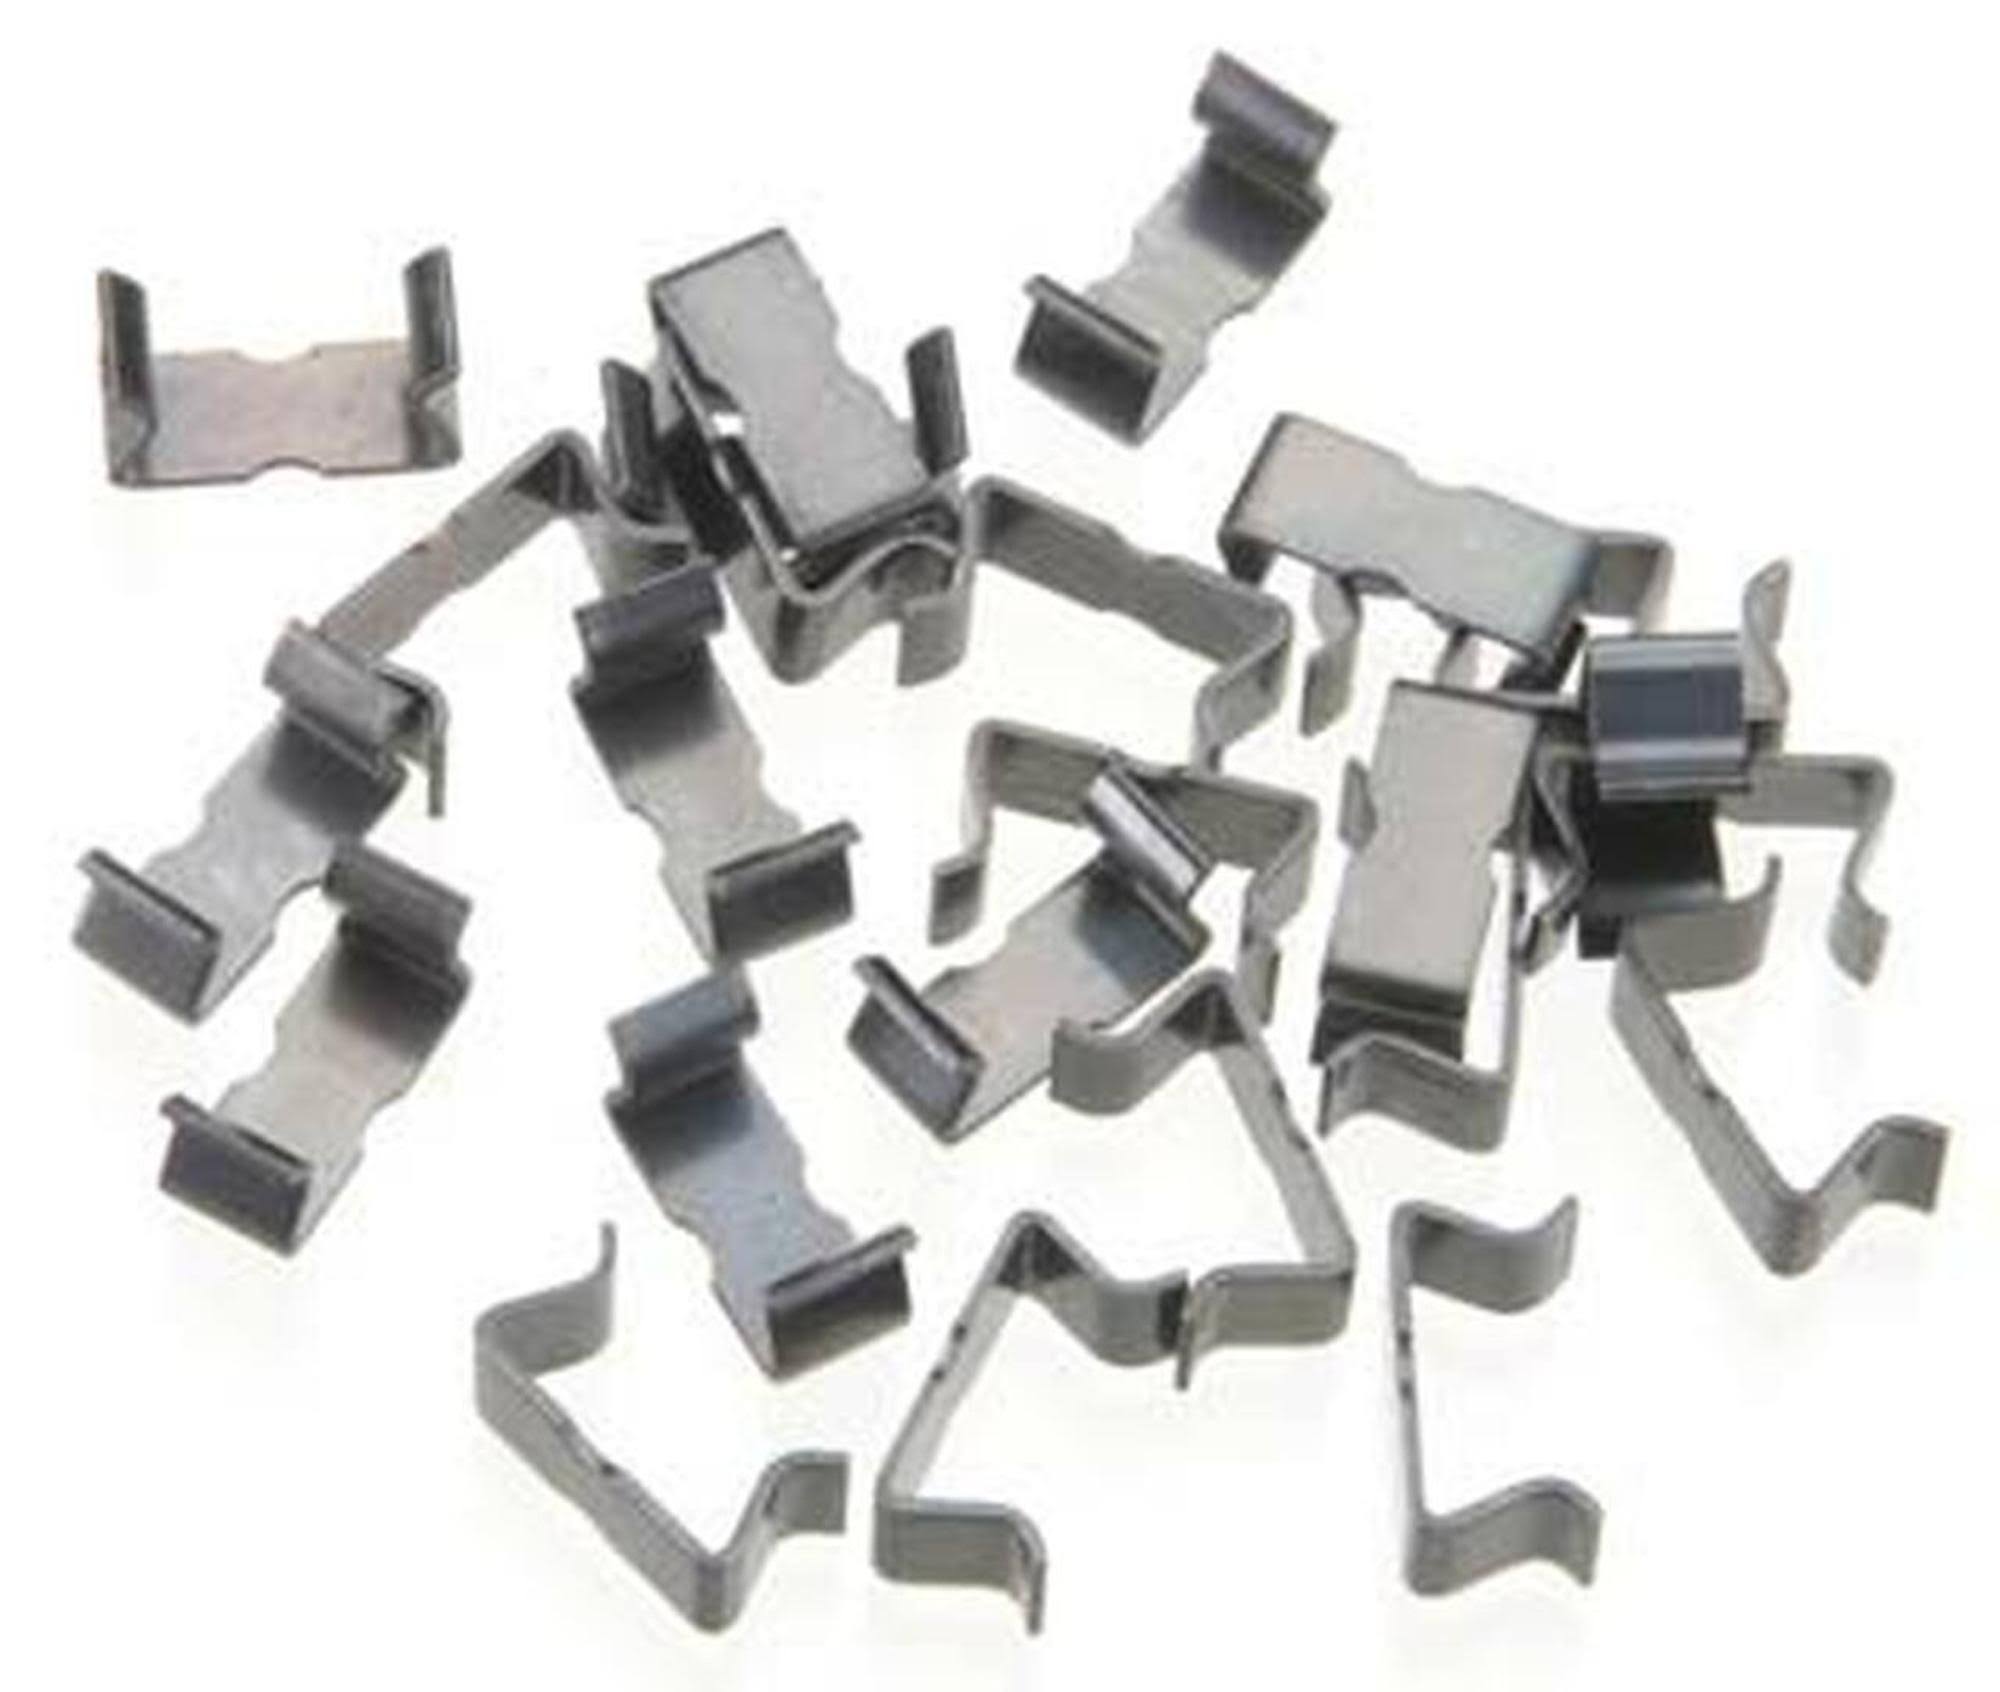 AFX/Racemasters Ho Scale Track Clips- 25 Pack, AFX1013